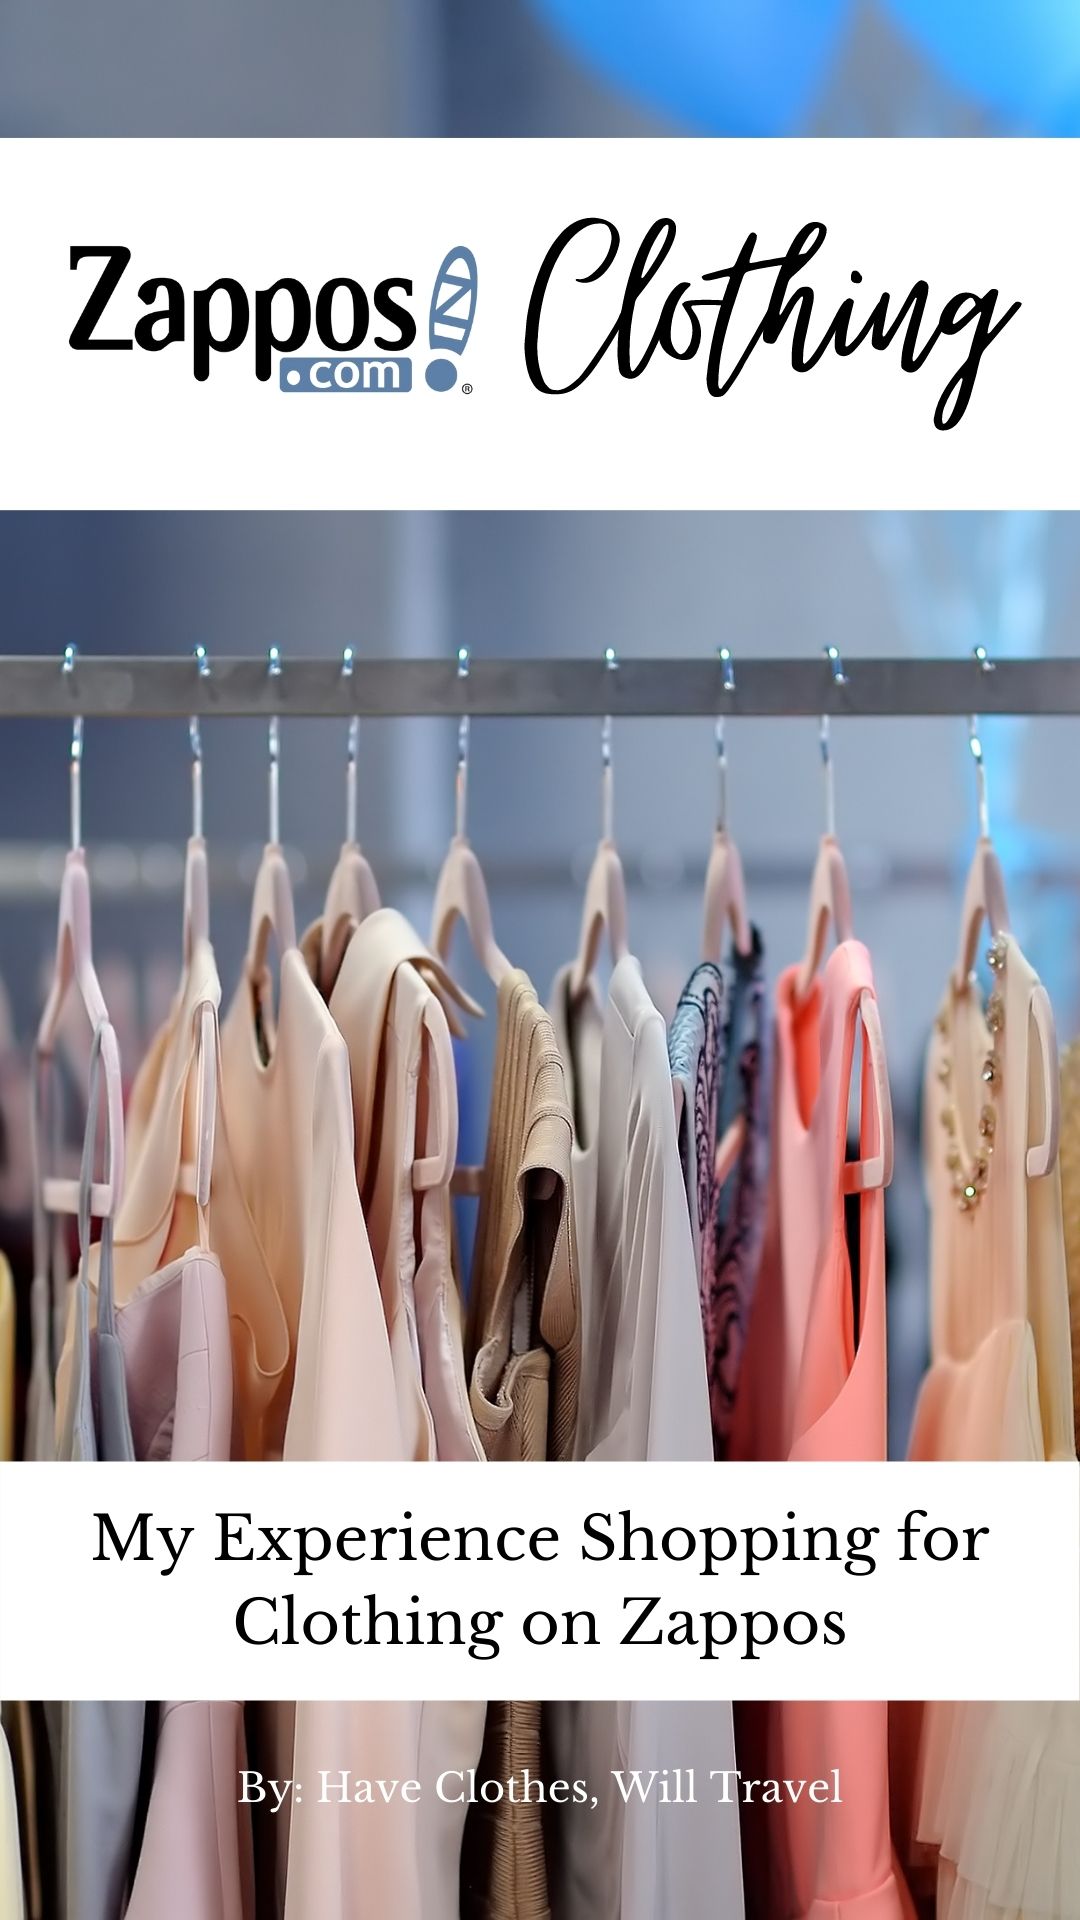 A metal clothing rack is lined with thin clothing hangers that hold stylish women clothing, including t-shirts and dresses. Text across the center of the image says "My experience shopping for clothing on Zappos"